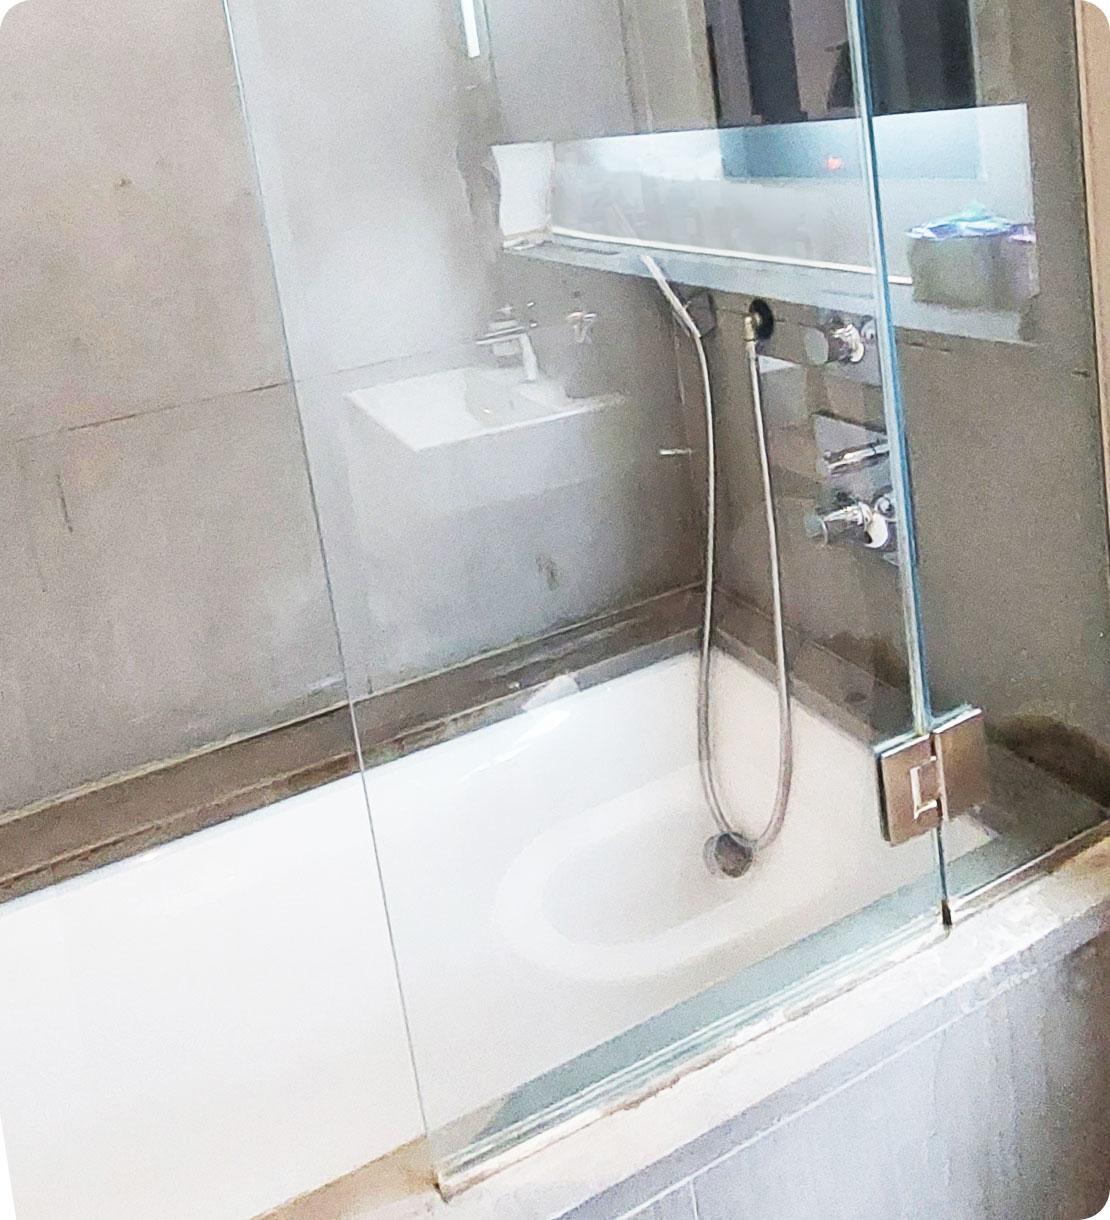 The image shows the same bathtub shower cabin but has been thoroughly cleaned. The glass door is now perfectly shiny and transparent. All the smudges and dried-up soapy scum are gone.